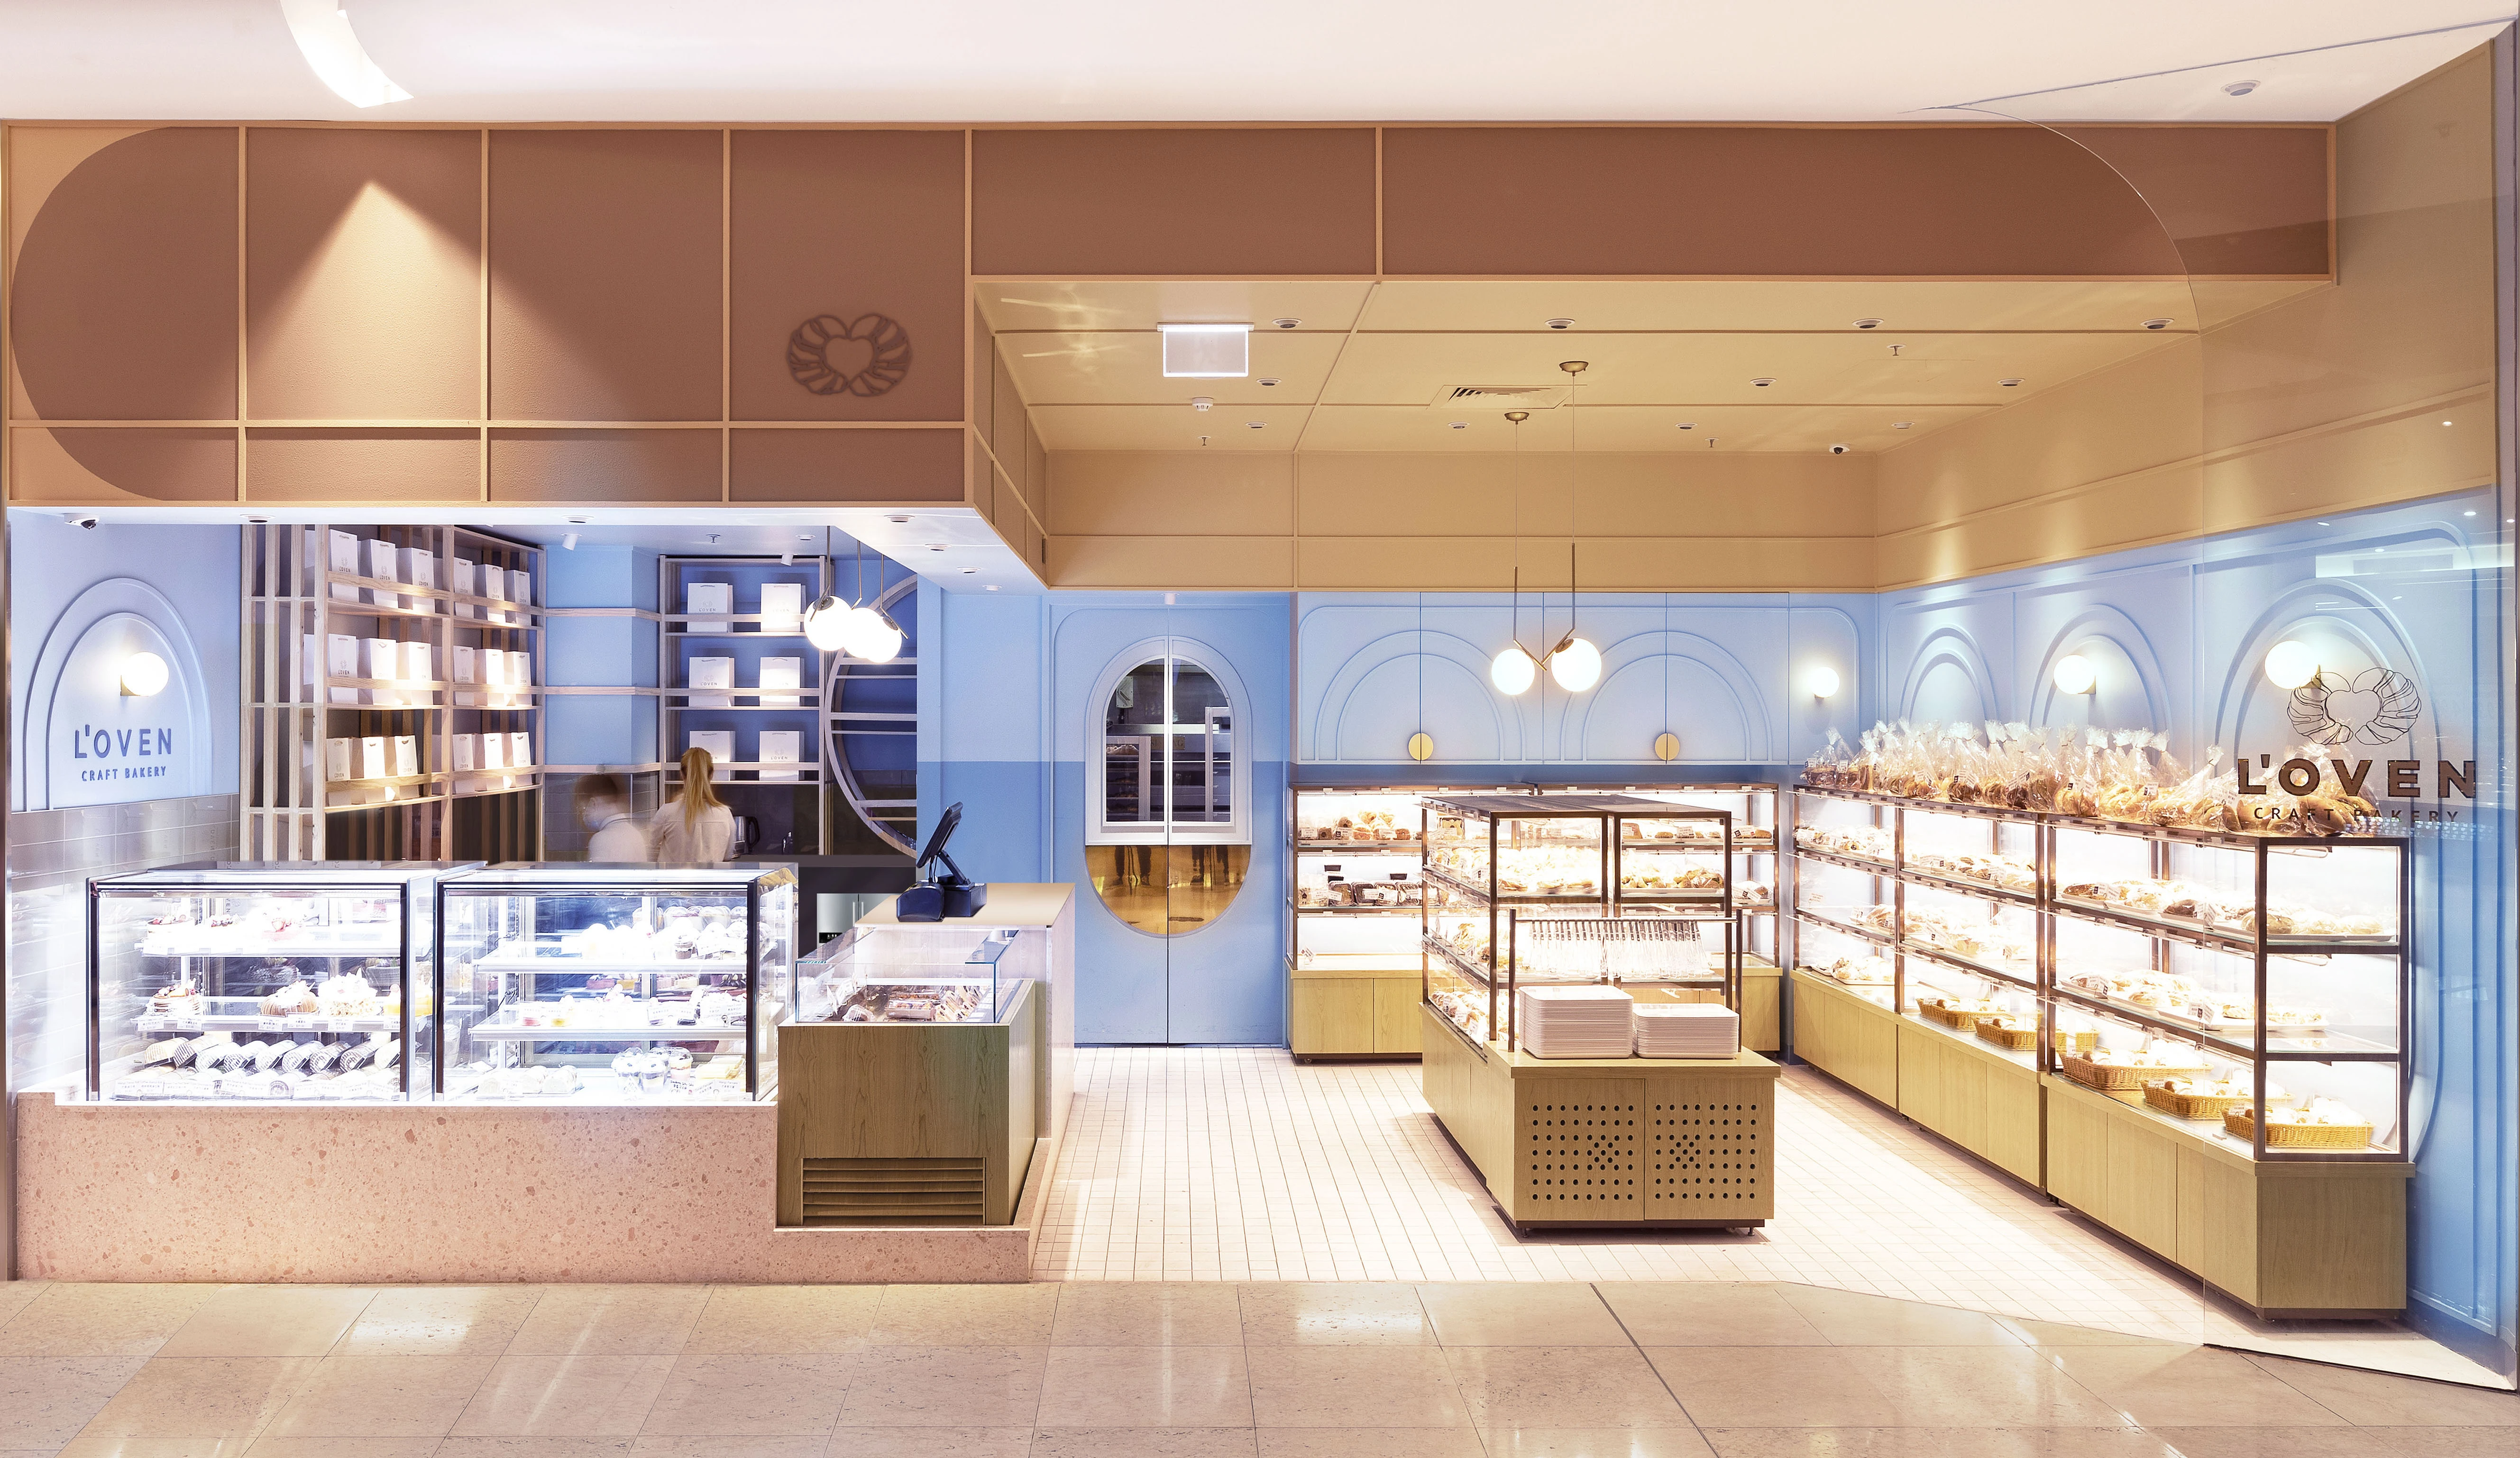 Blue bakery with apricots ceiling and glass cabinets.